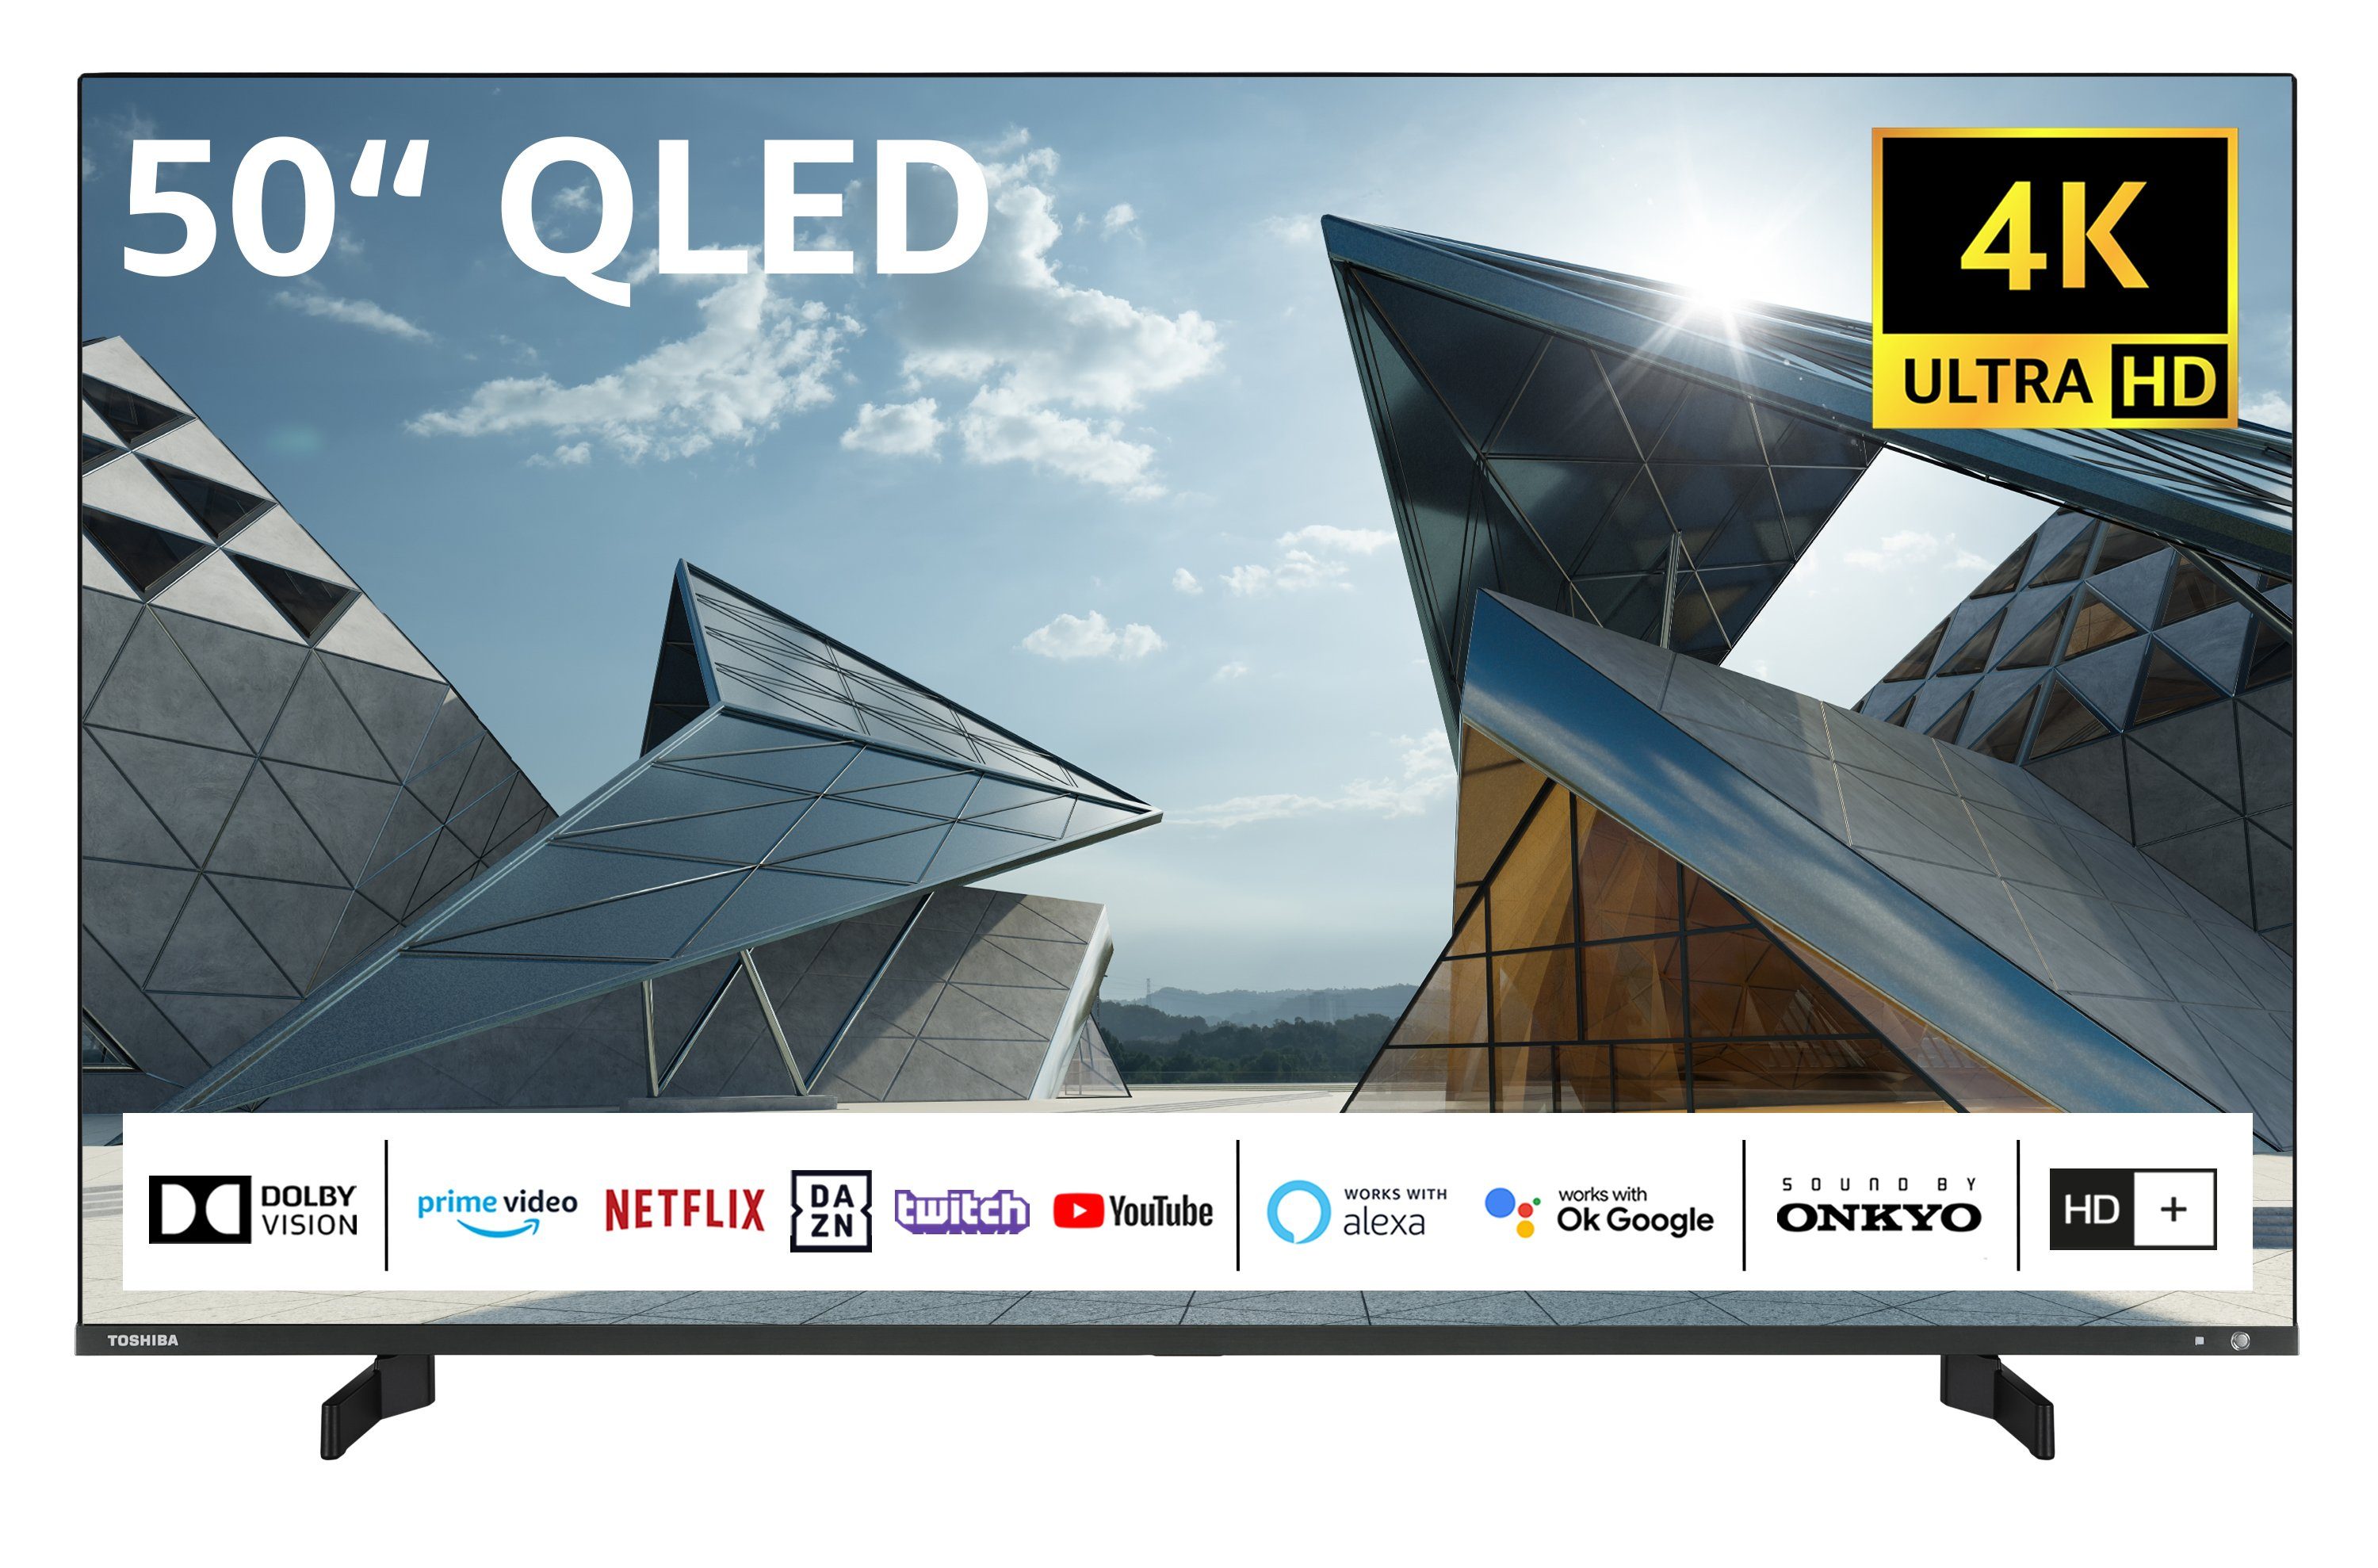 Ultra Toshiba HDR cm/50 Triple-Tuner, 6 4K Inkl. TV, - Onkyo HD) HD, (126 Vision, 50QL5D63DAY Dolby Smart Sound QLED-Fernseher Monate Zoll, by